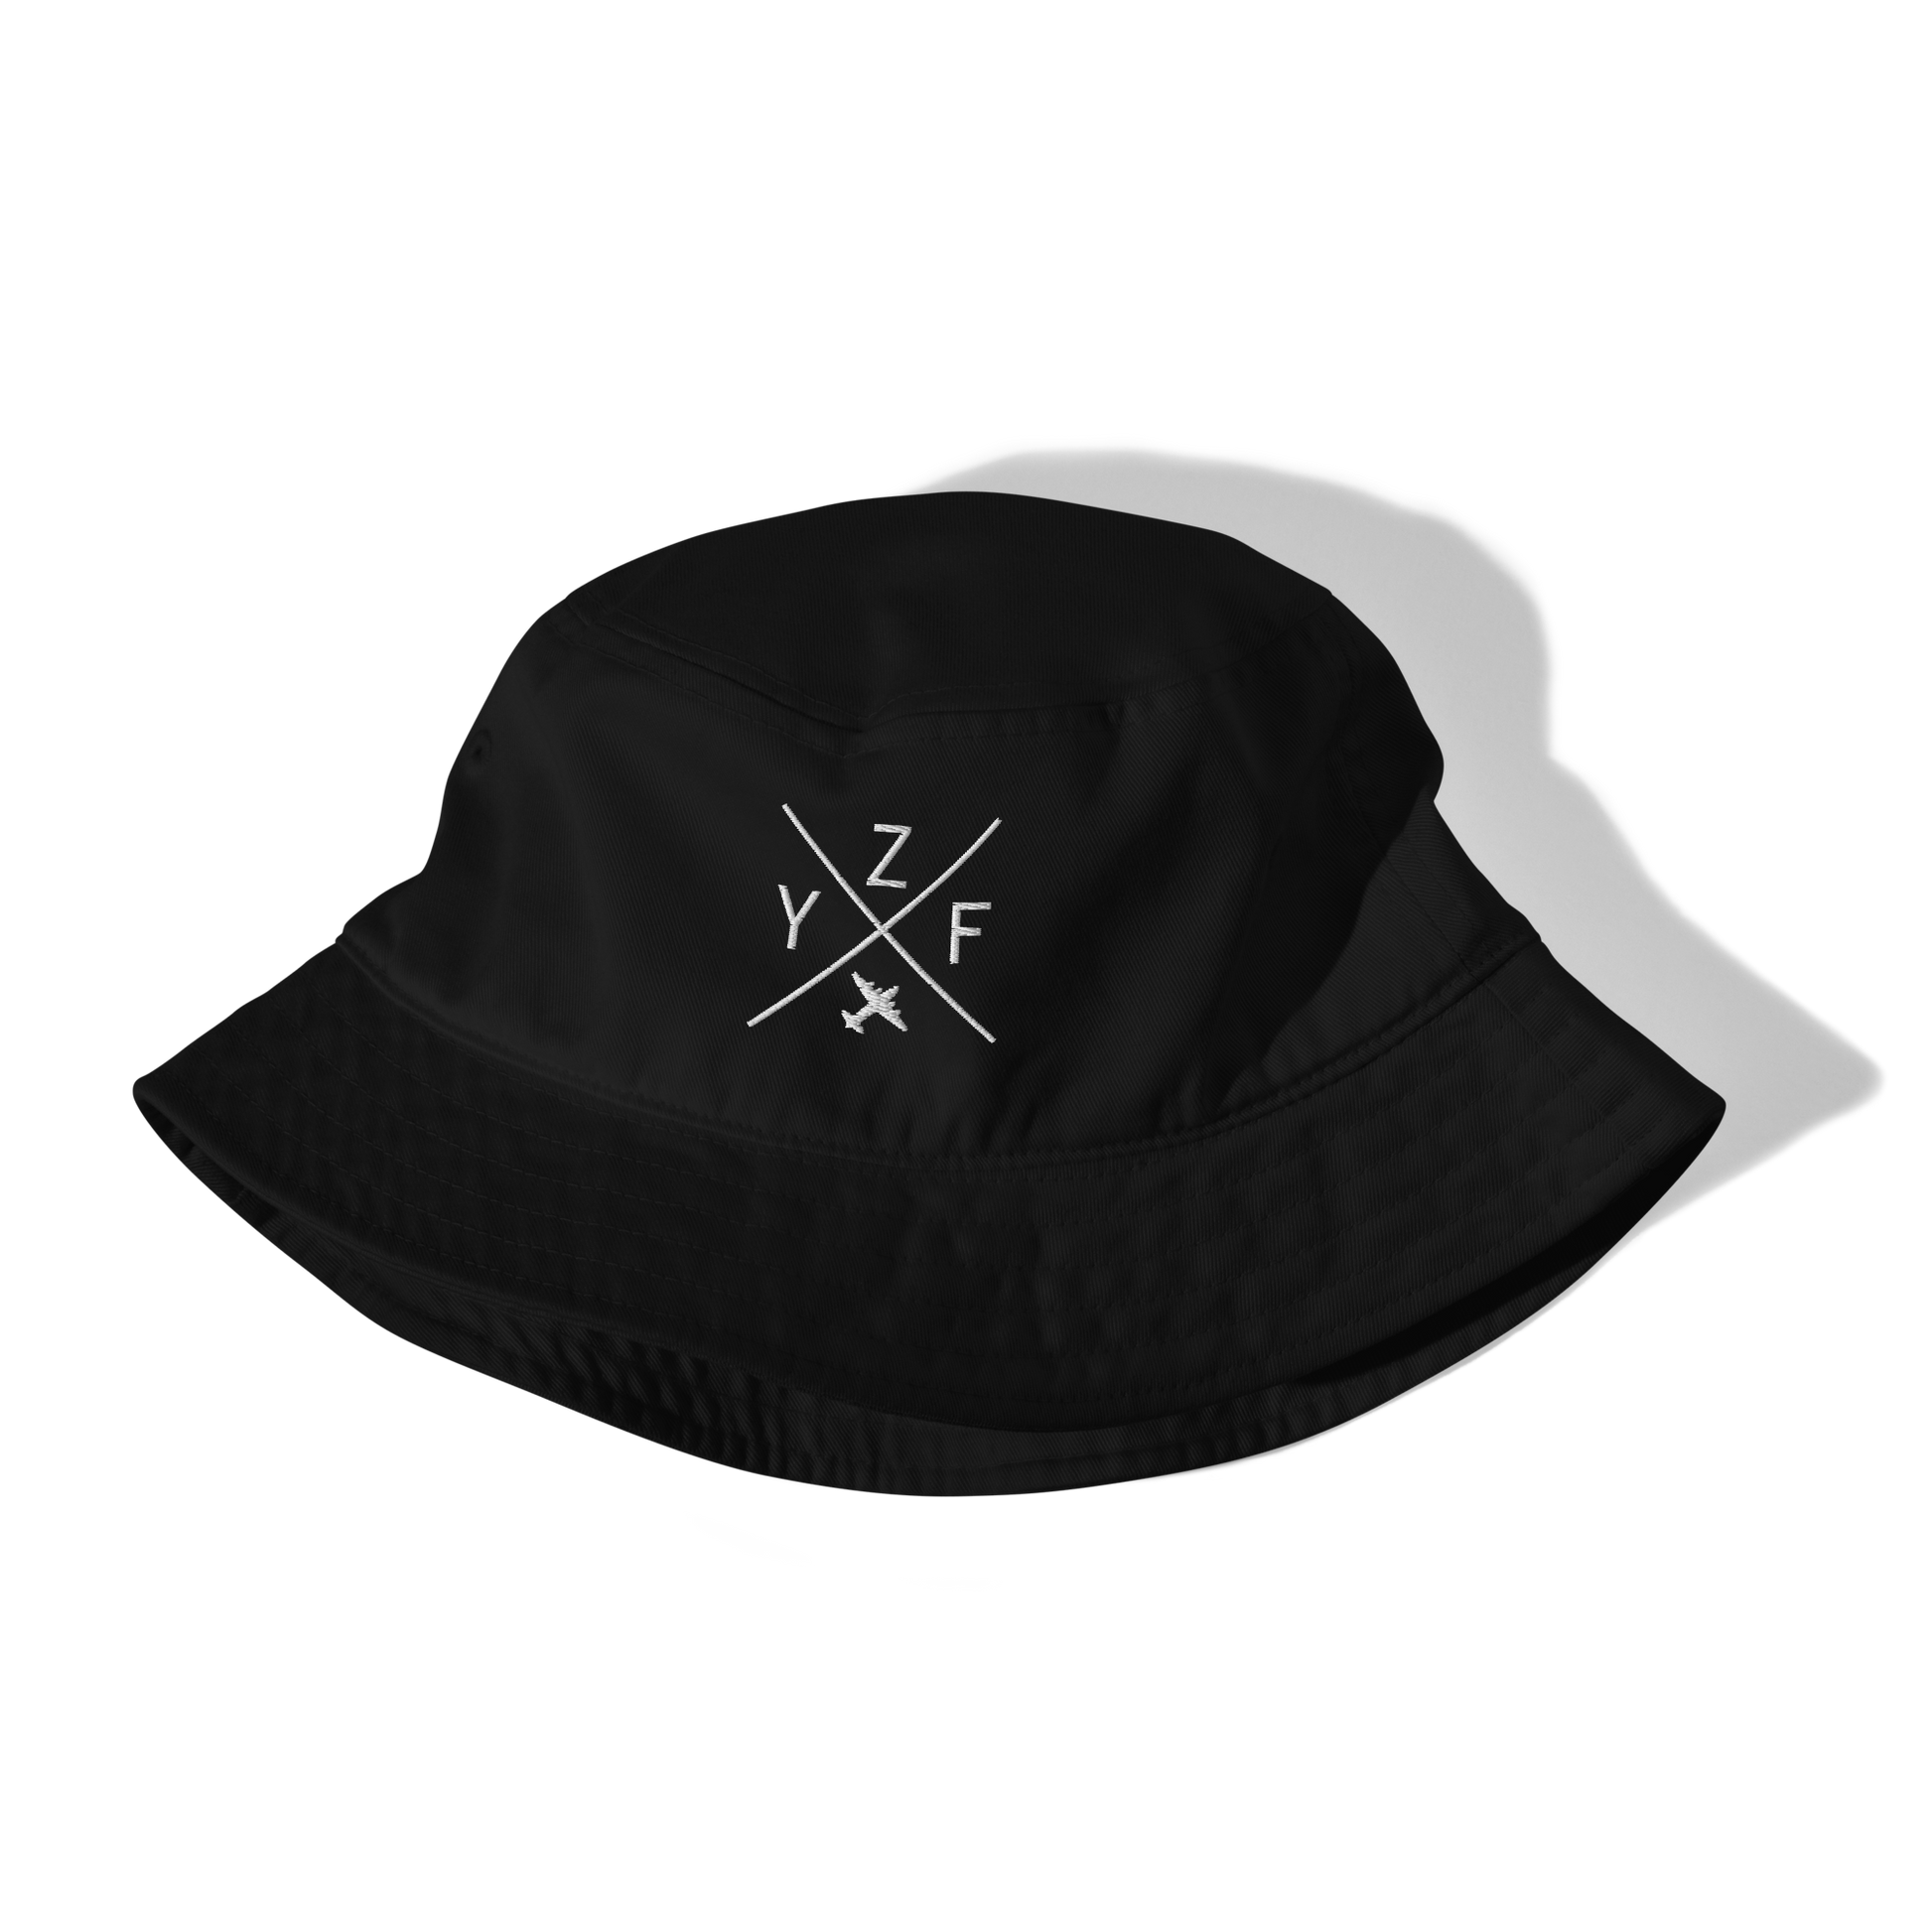 YHM Designs - YZF Yellowknife Organic Cotton Bucket Hat - Crossed-X Design with Airport Code and Vintage Propliner - White Embroidery - Image 02